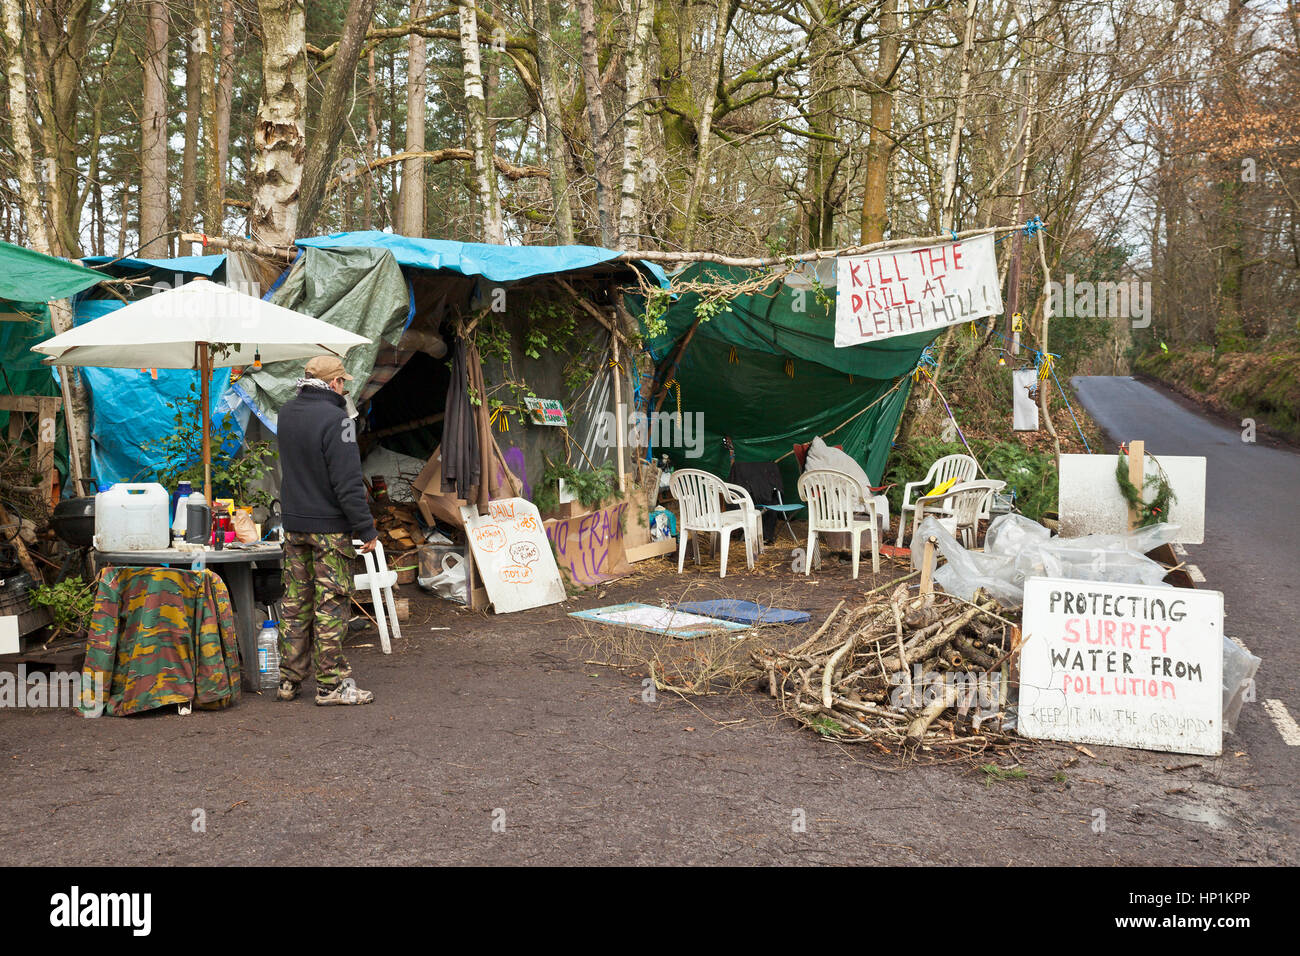 Coldharbour Lane, Abinger Forest, near Leith Hill, Surrey, UK. 17th Feb, 2017. Anti fracking protesters roadside entrance camp. Credit: Tony Watson/Alamy Live News Stock Photo